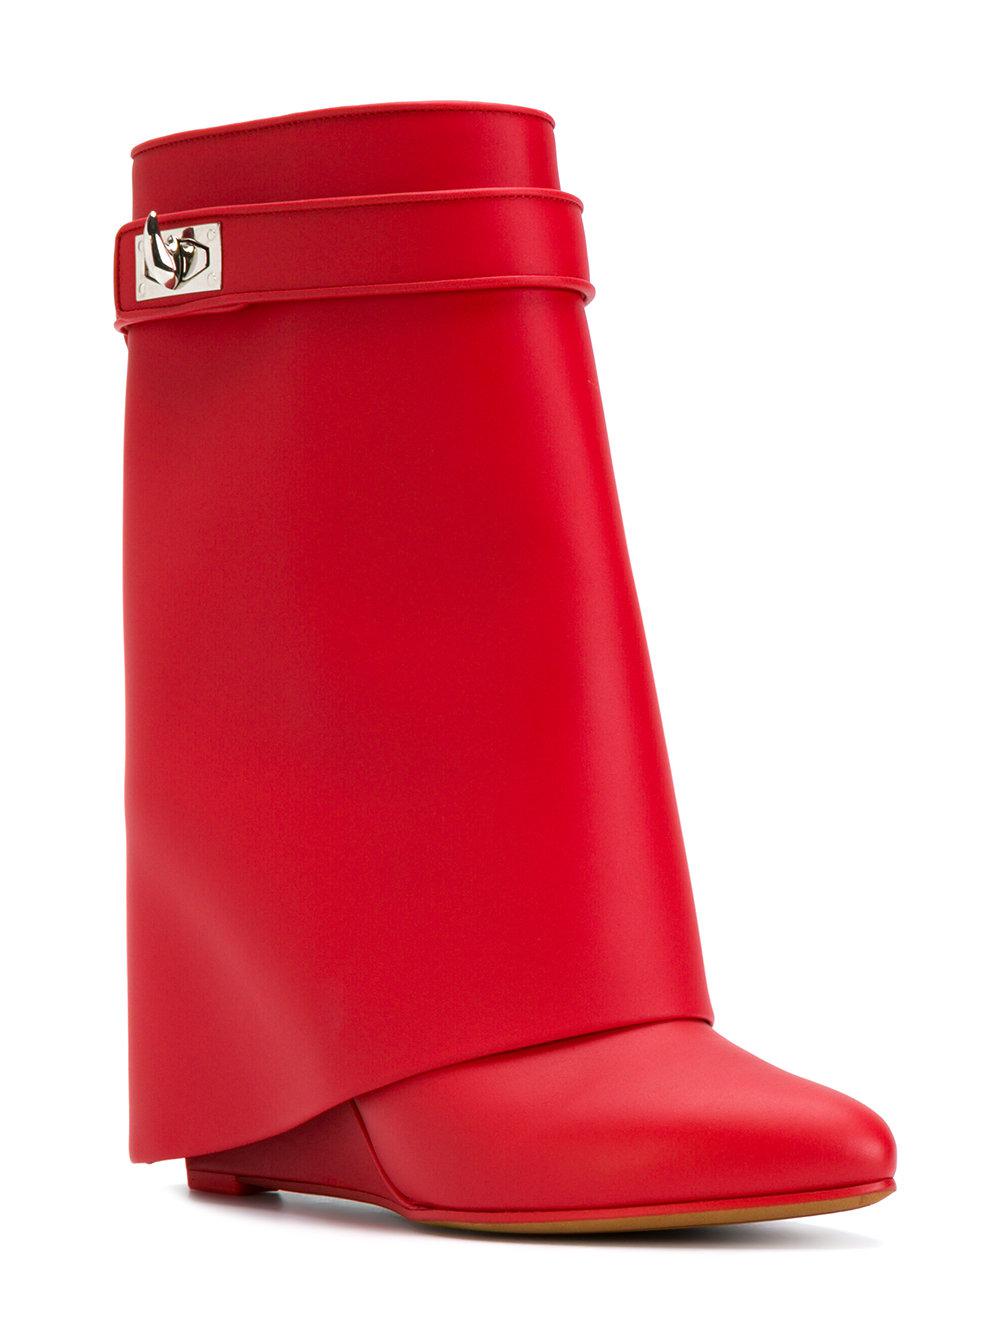 Givenchy Shark Lock Boots in Red | Lyst